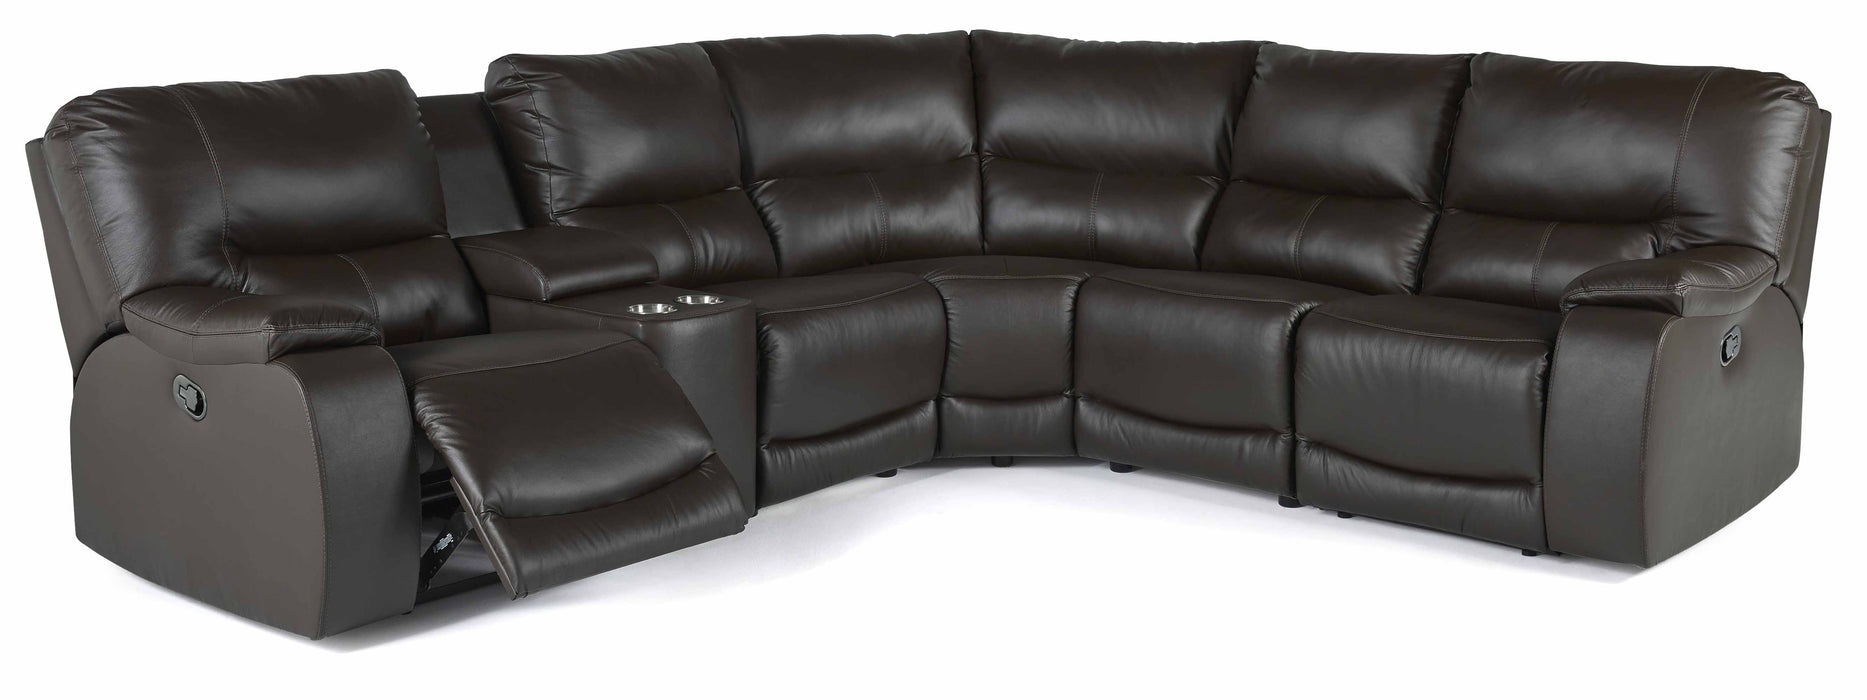 Norwood Leather Reclining Sectional